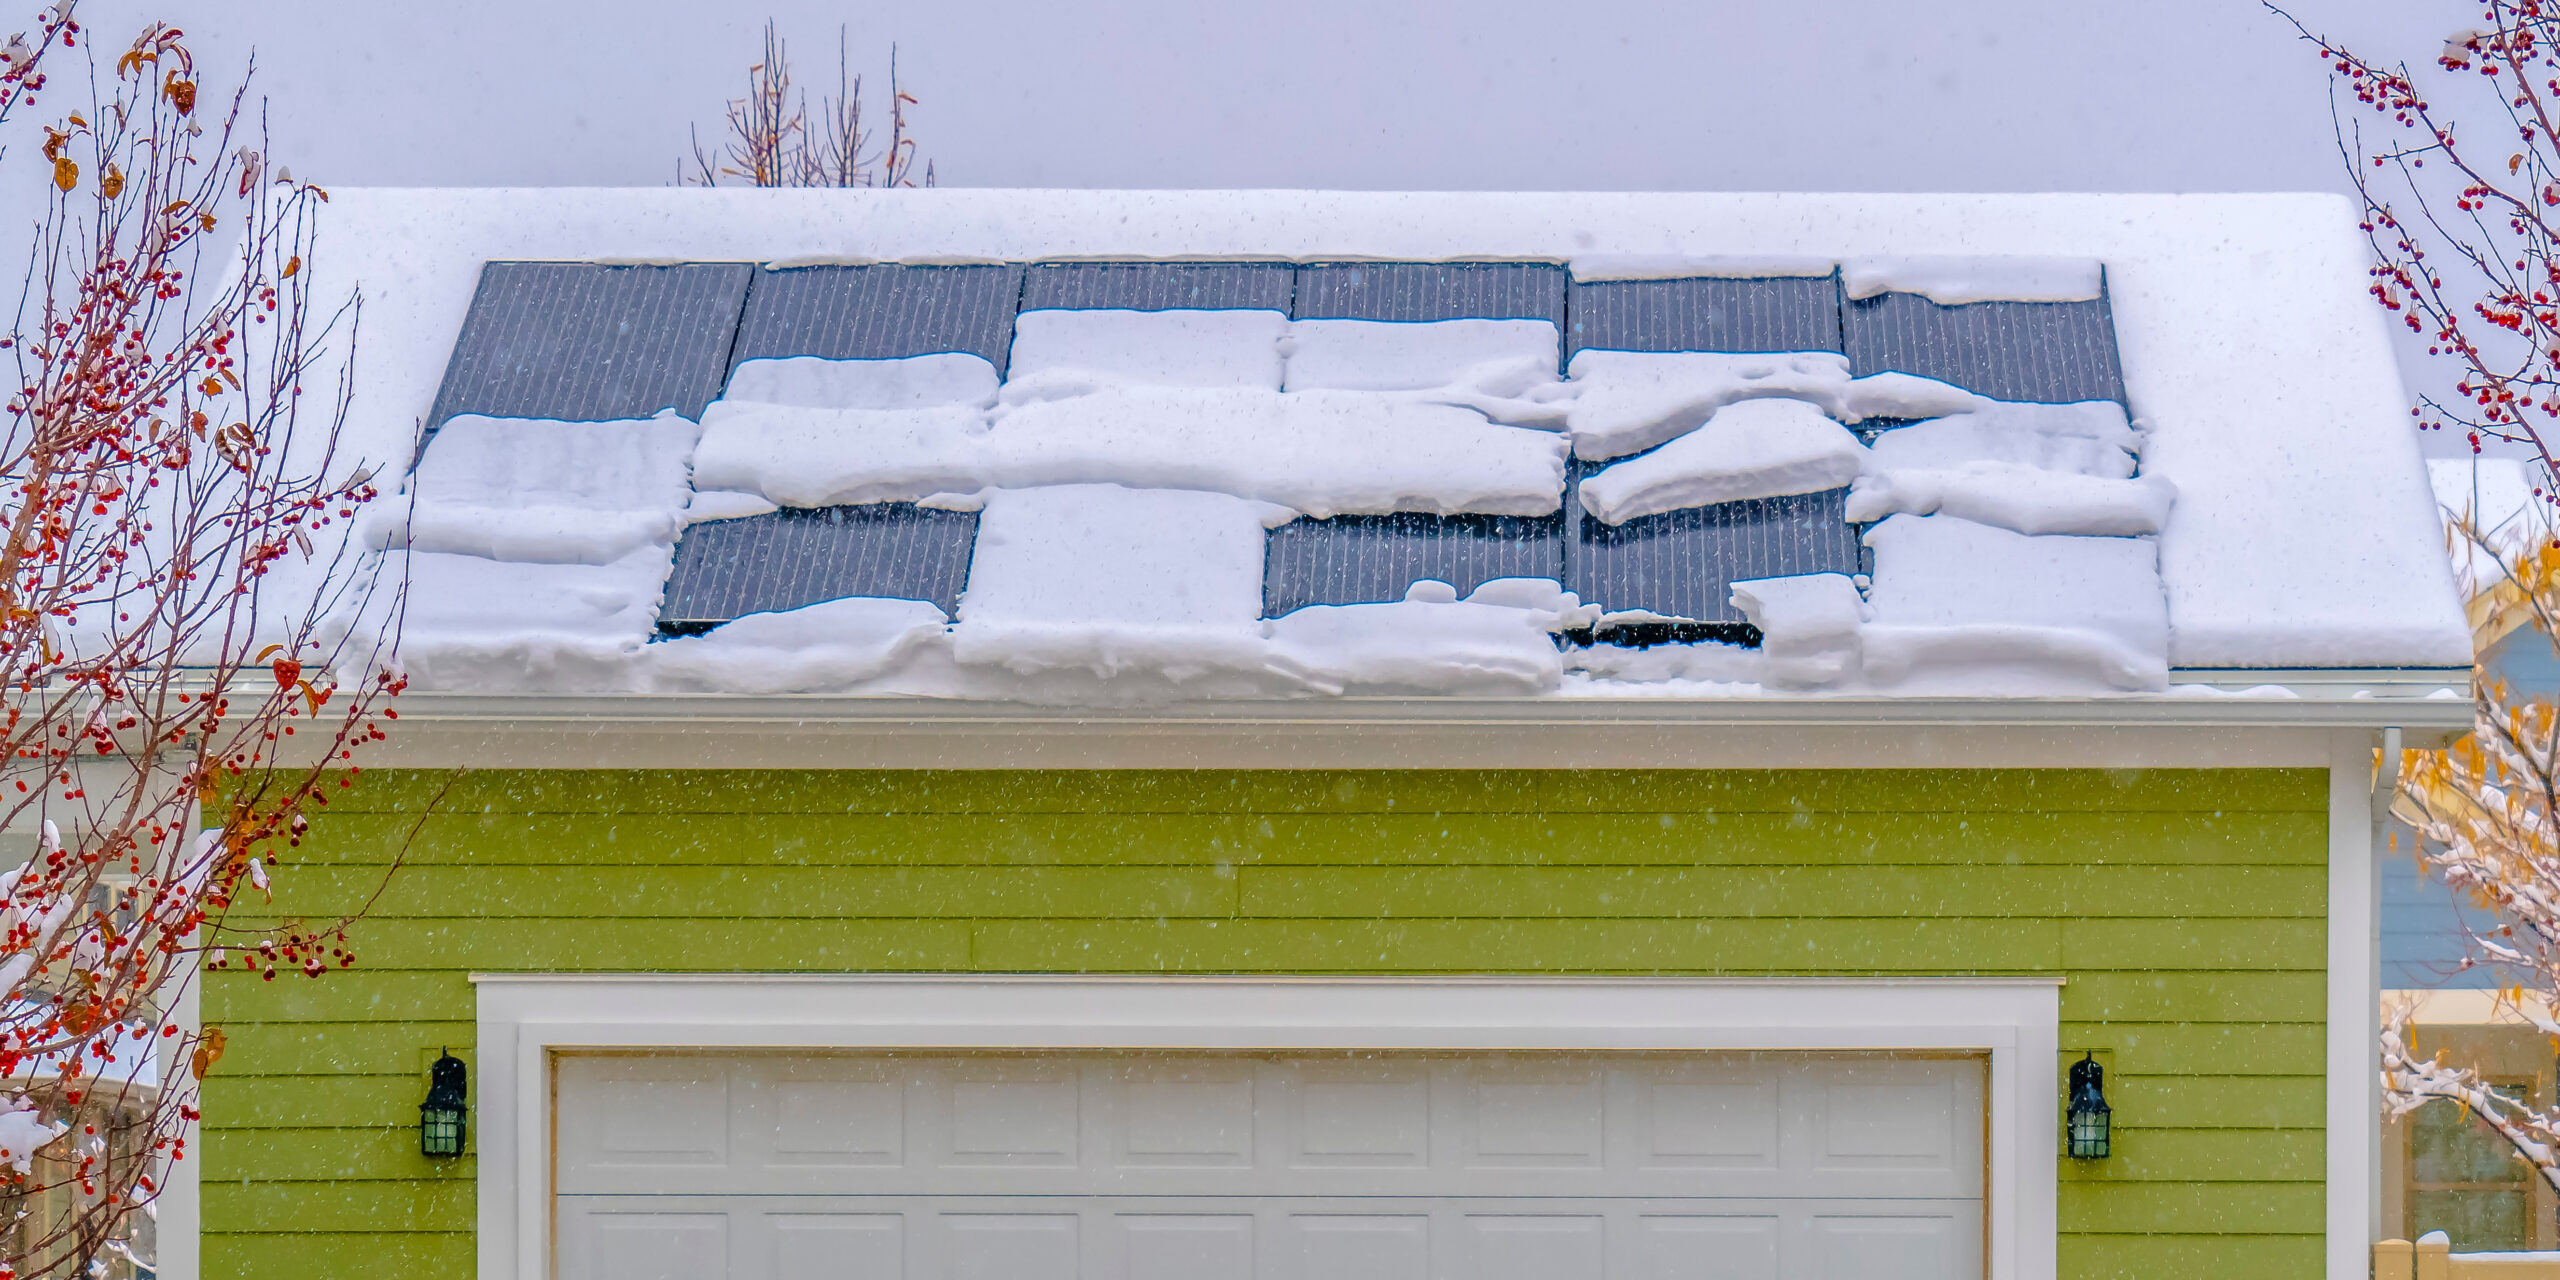 Solar panels on snow covered roof in winter